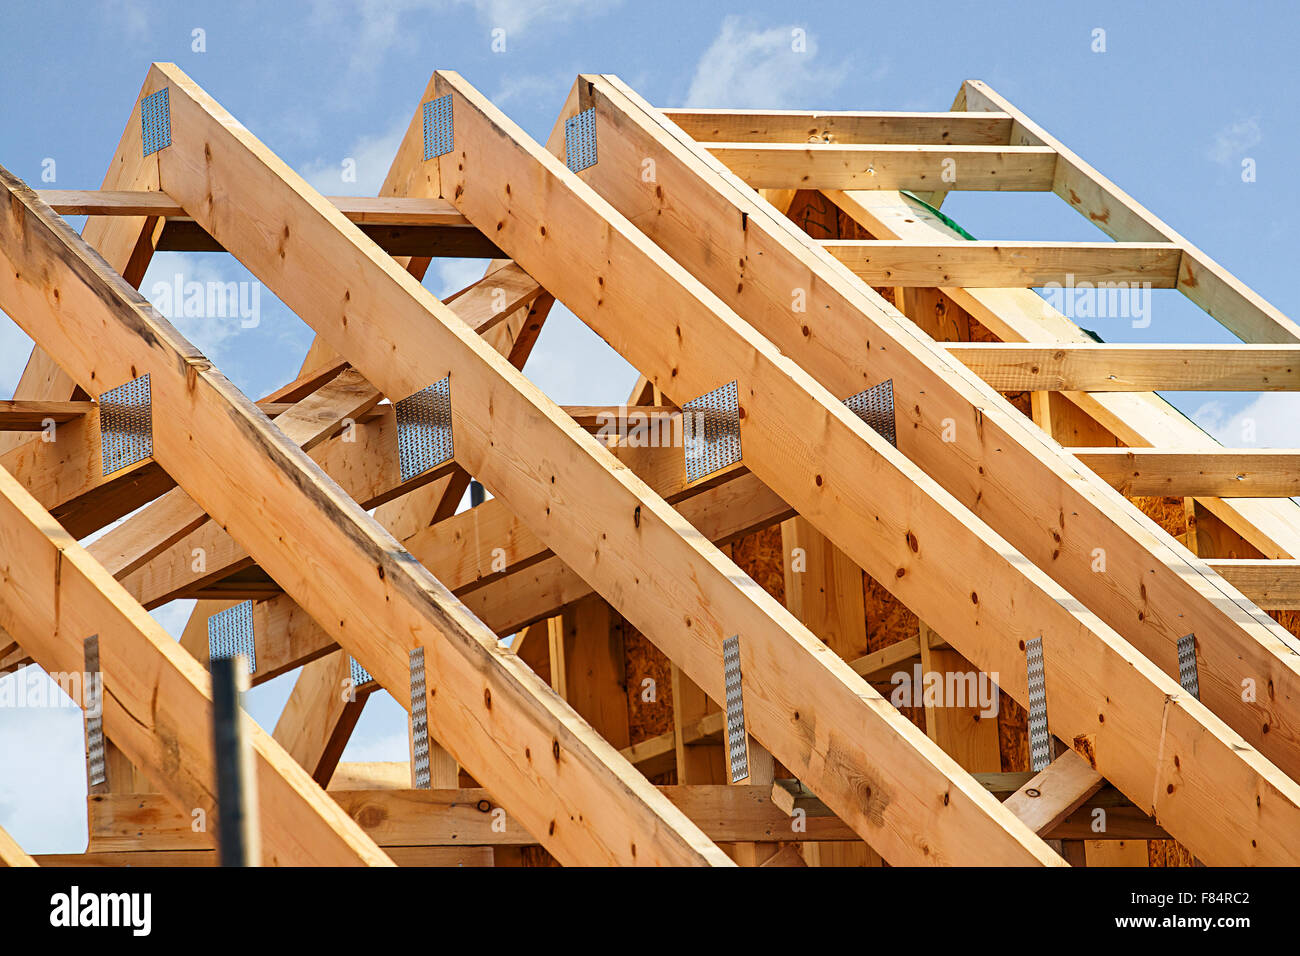 Standard timber framed building with close up on the roof trusses Stock Photo